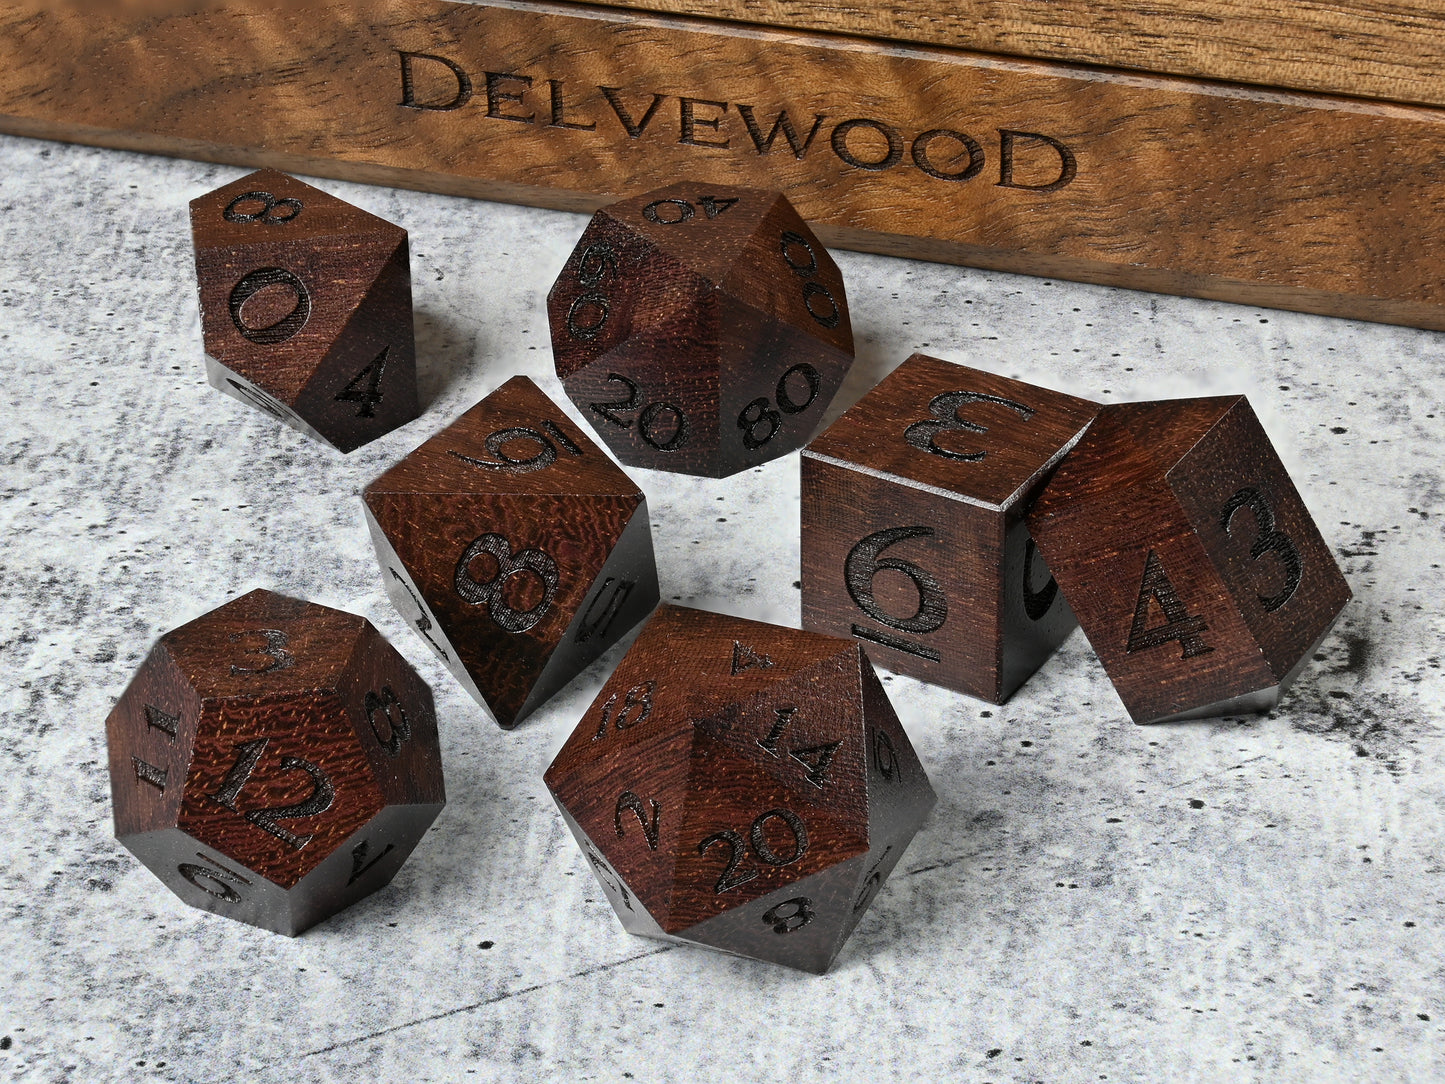 Katalox wood dice set for dnd rpg tabletop gaming in front of Delvewood delver's kit dice box.